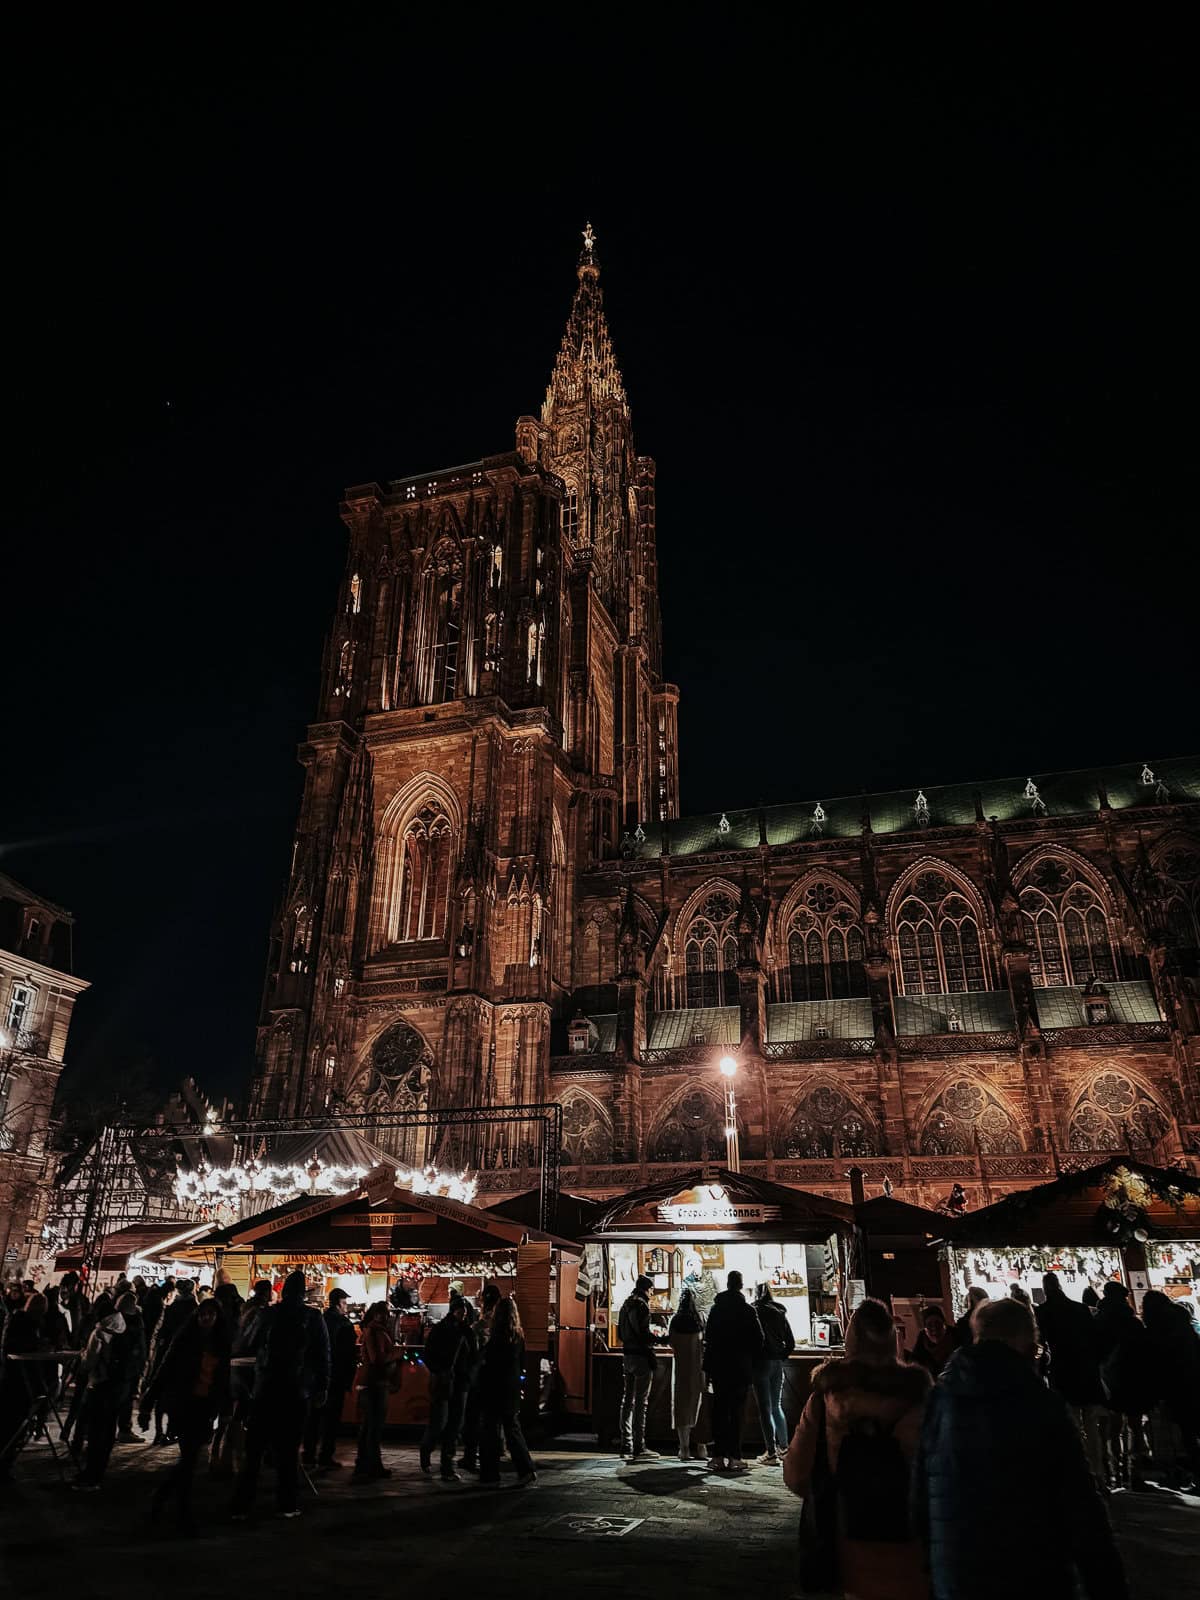 A night view of an illuminated Gothic cathedral towering over a Christmas market bustling with people and decorated with white lights